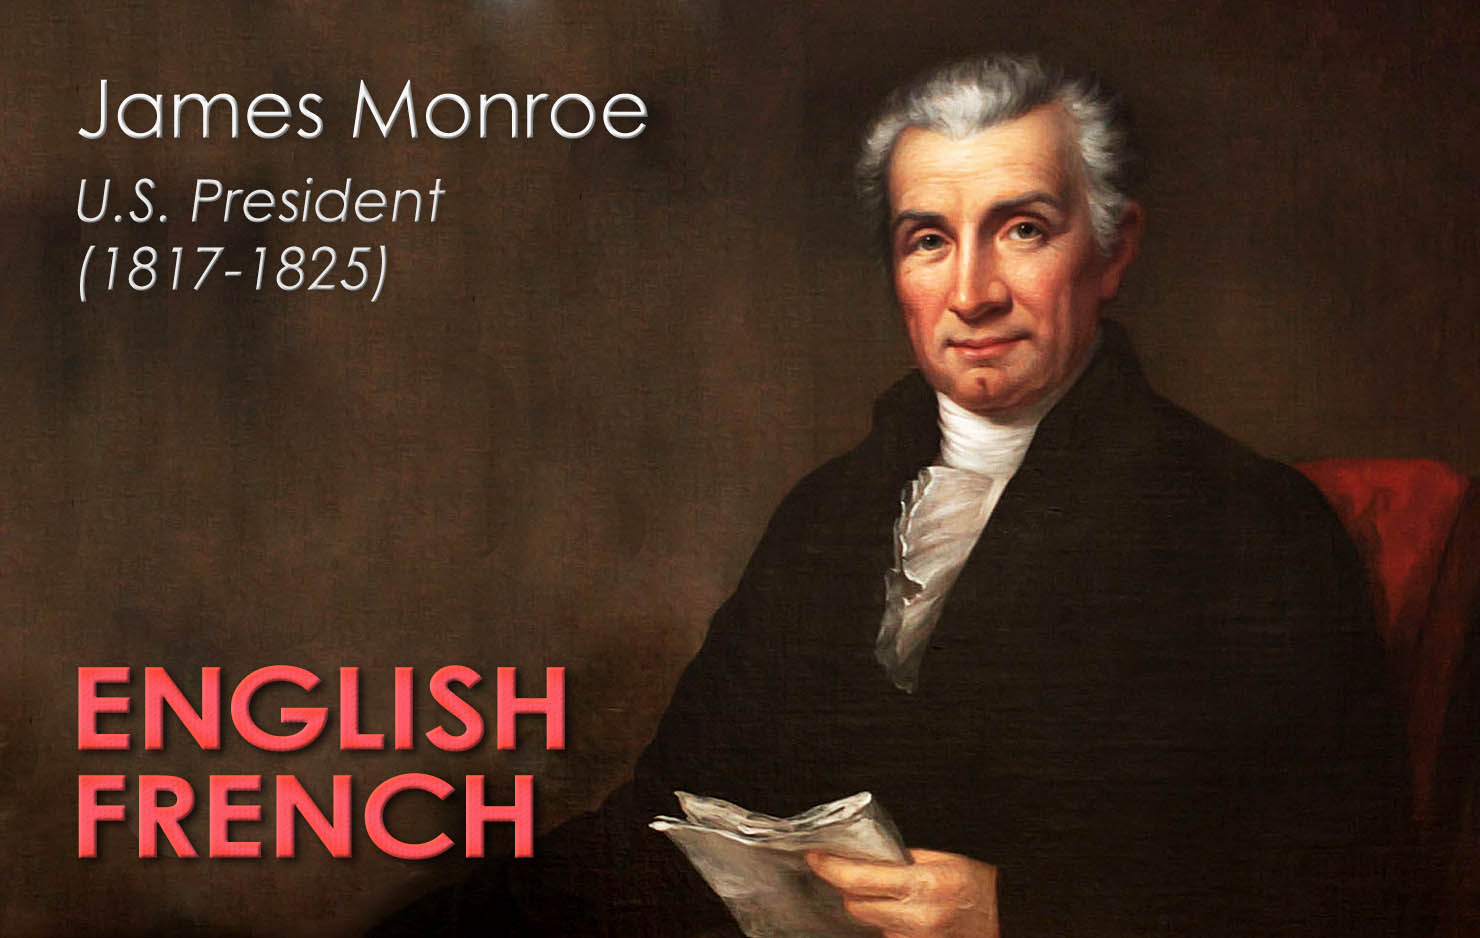 The fifth President of the United States, James Monroe adopted many French customs while a diplomat in Paris, including learning fluent French. The entire Monroe family knew the language and often spoke it with one another at home..